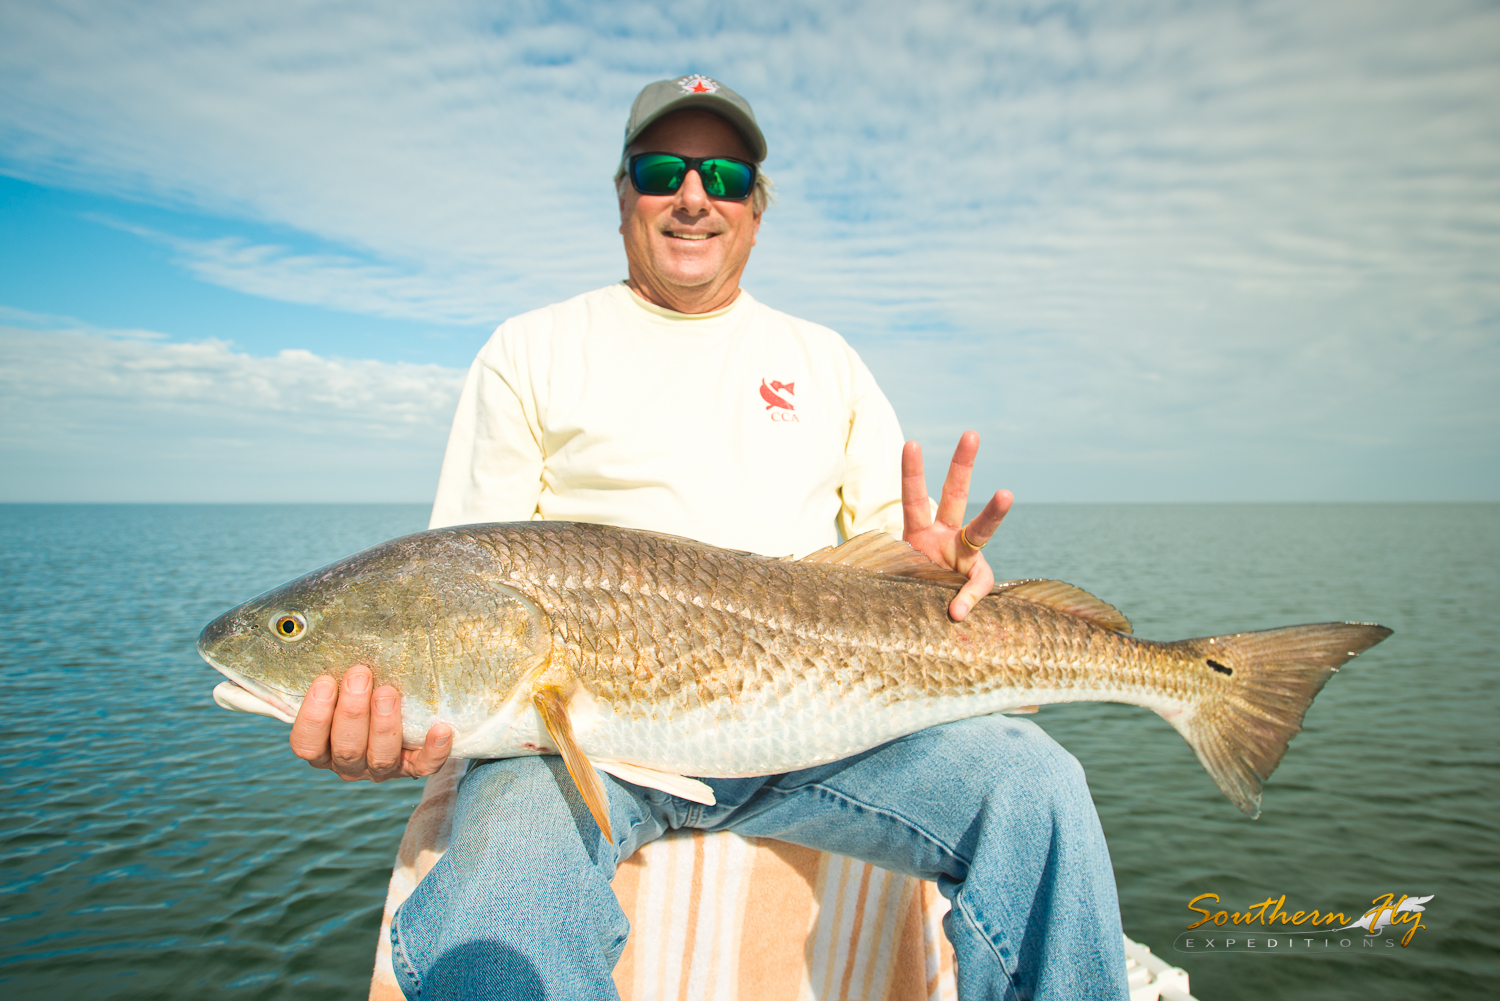 Best Spin Fishing Guide New Orleans Southern Fly Expeditions